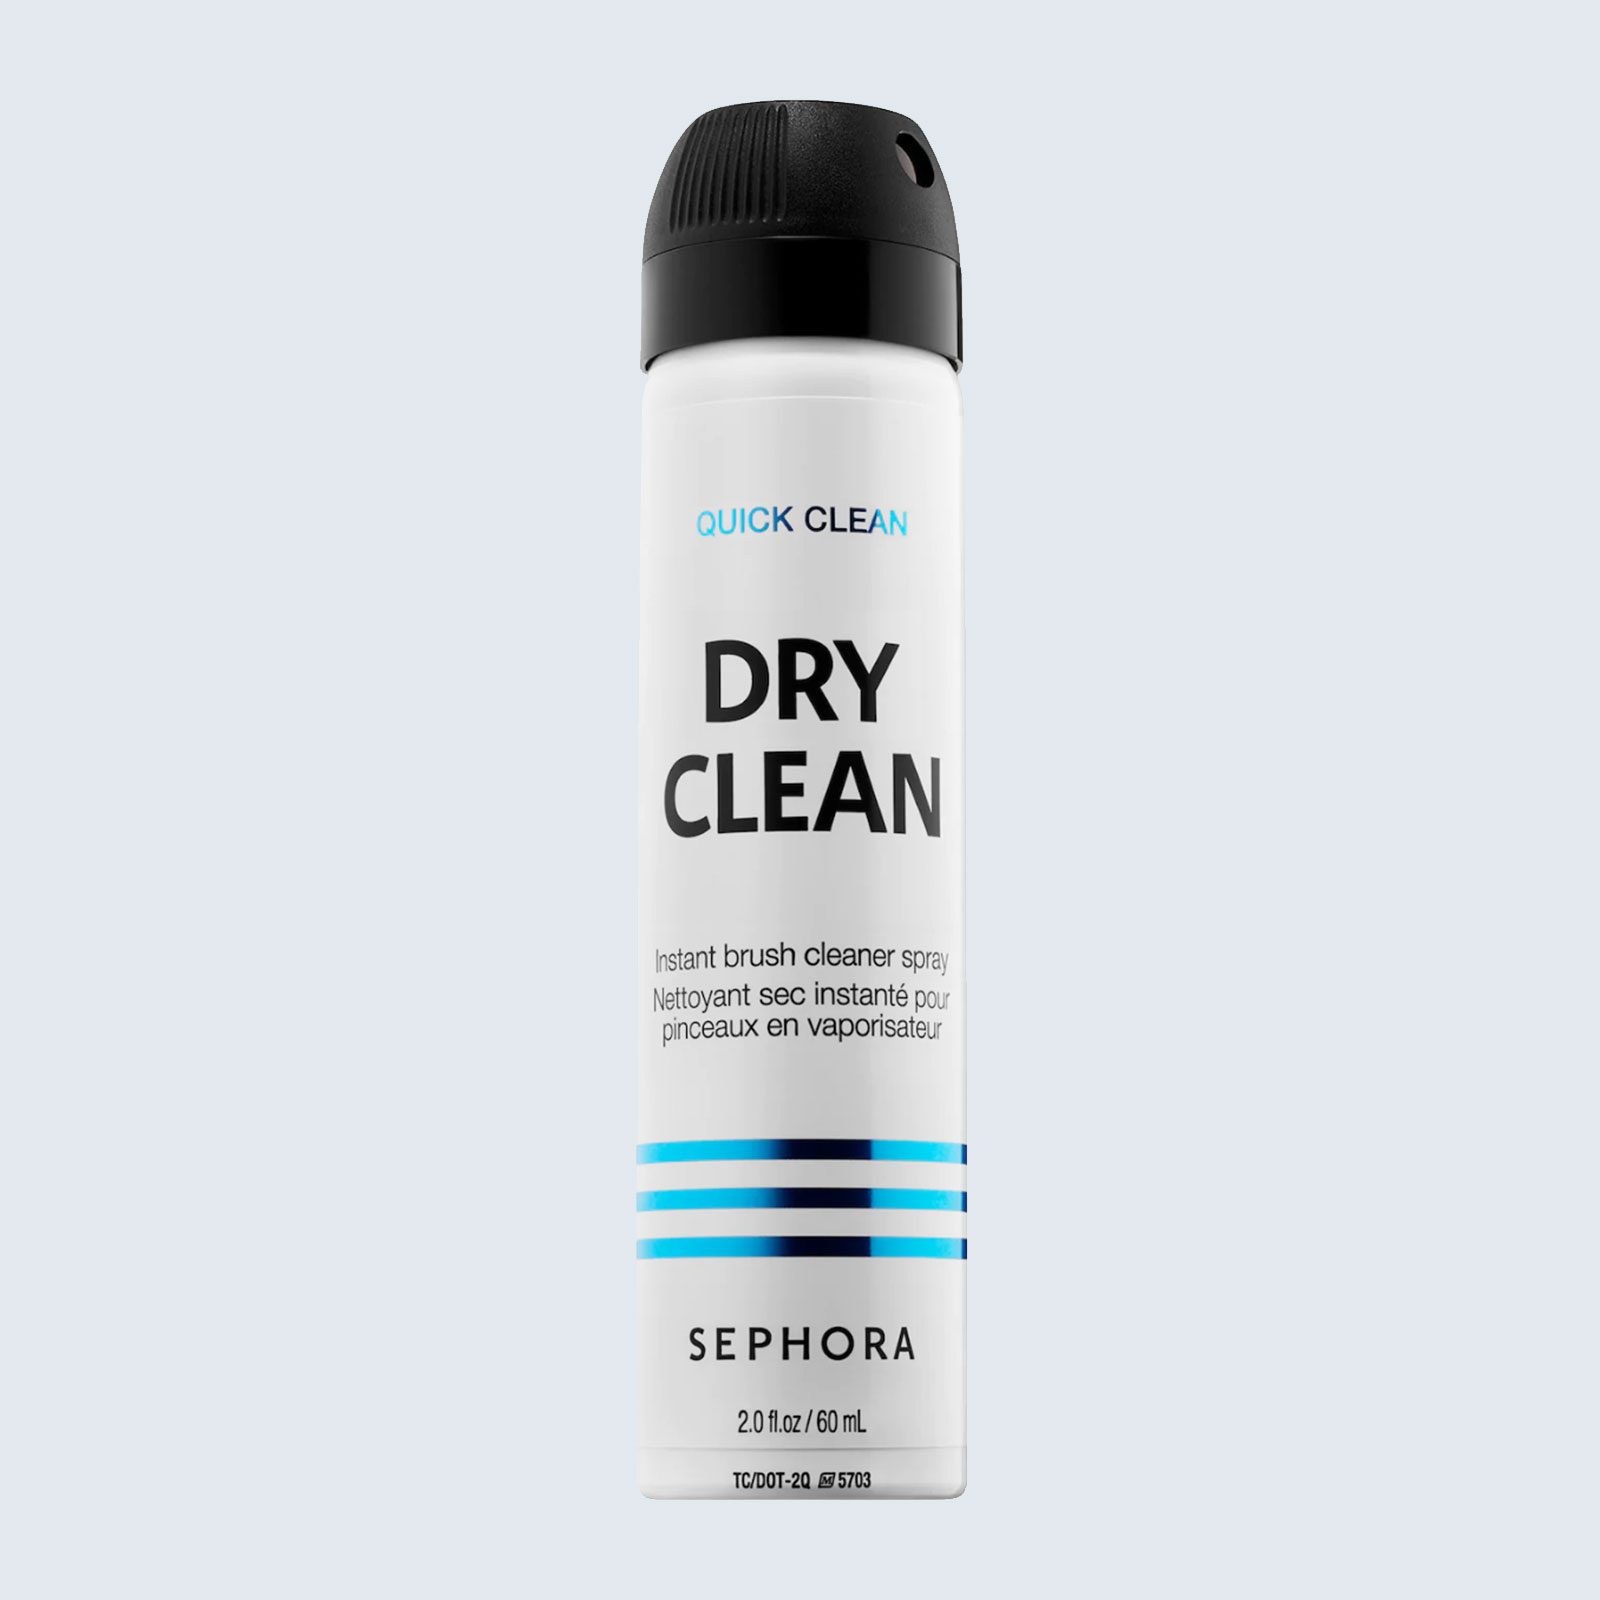 Best makeup brush cleaning spray: Sephora Dry Clean Instant Brush Cleaner Spray